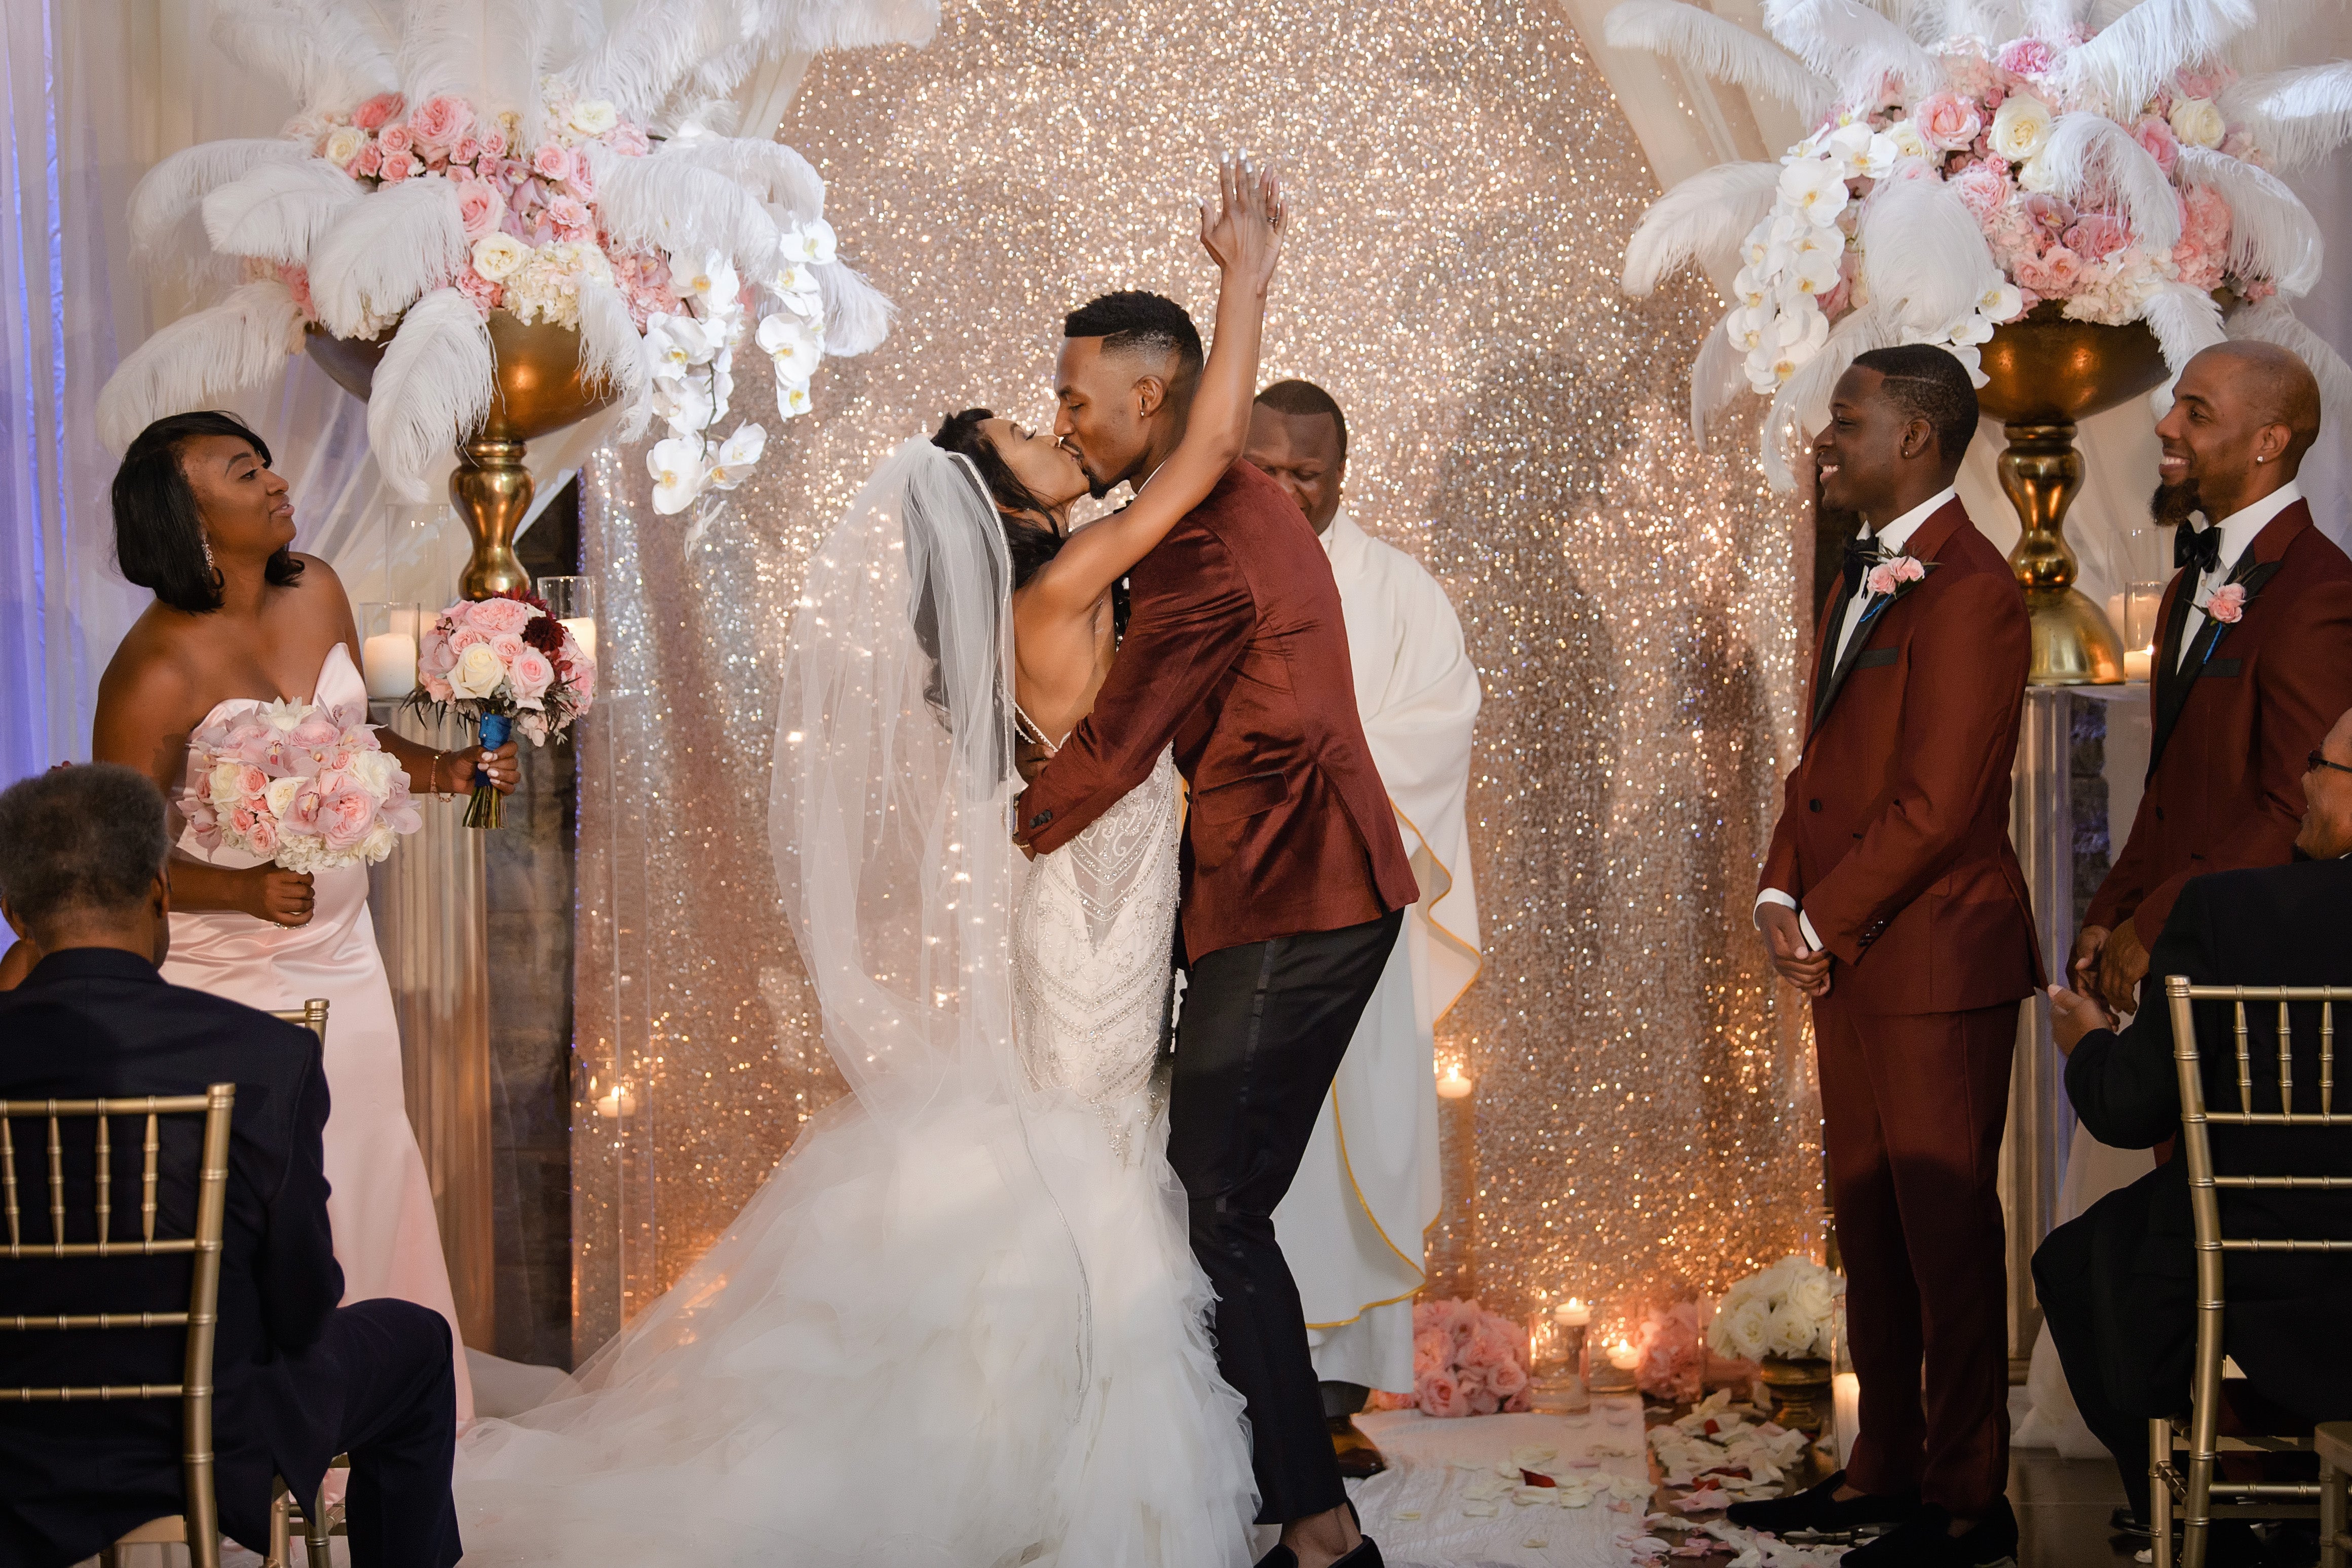 Bridal Bliss: Robin and Isaac's Glam Wedding Was A Real Stunner
